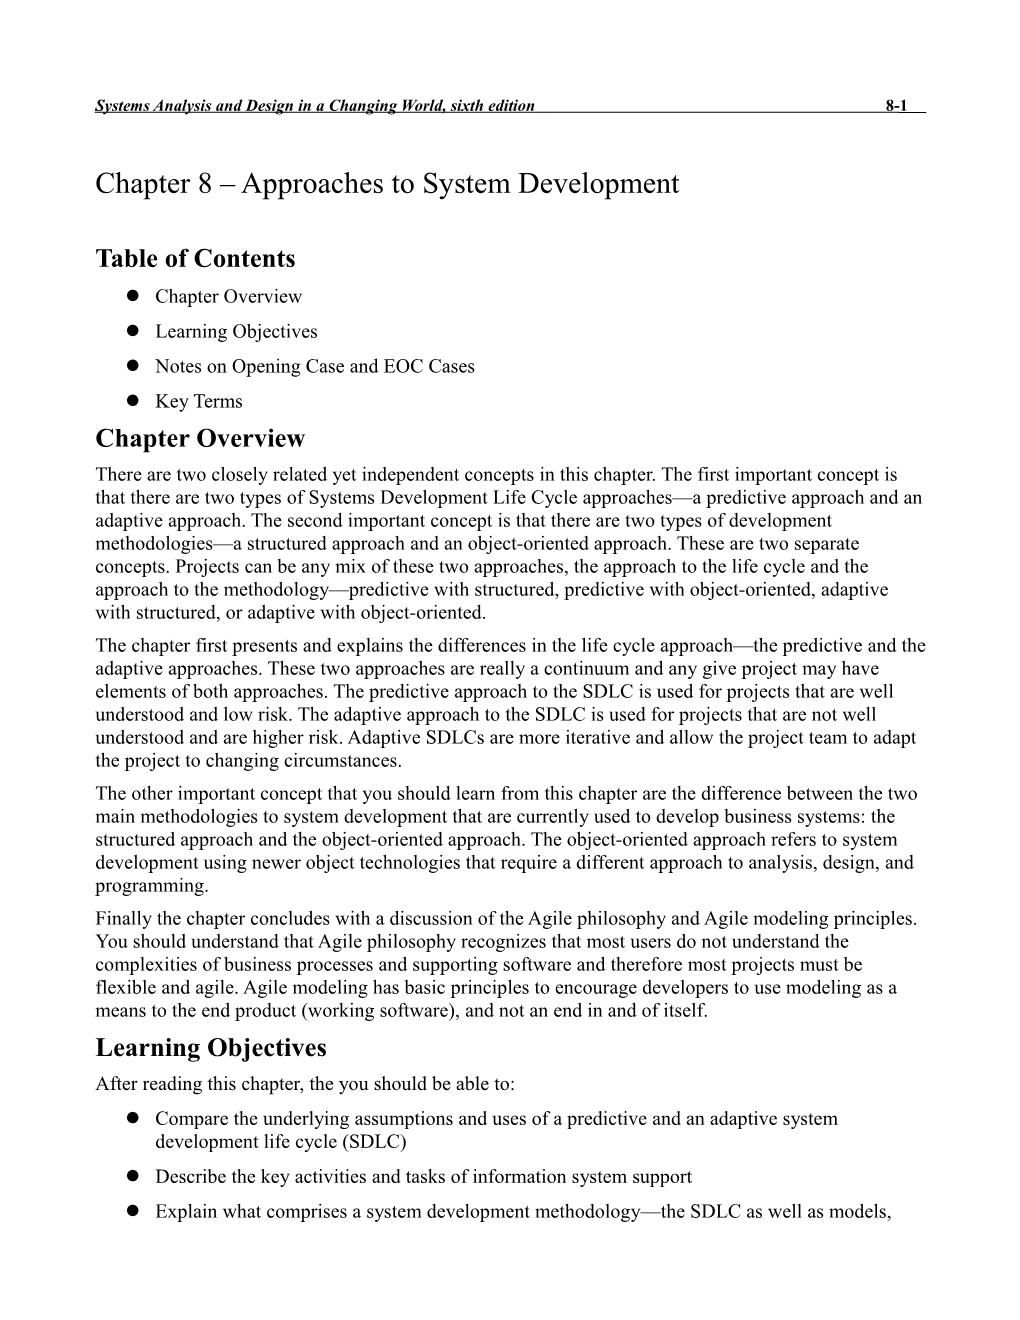 Chapter 8 Approaches to System Development